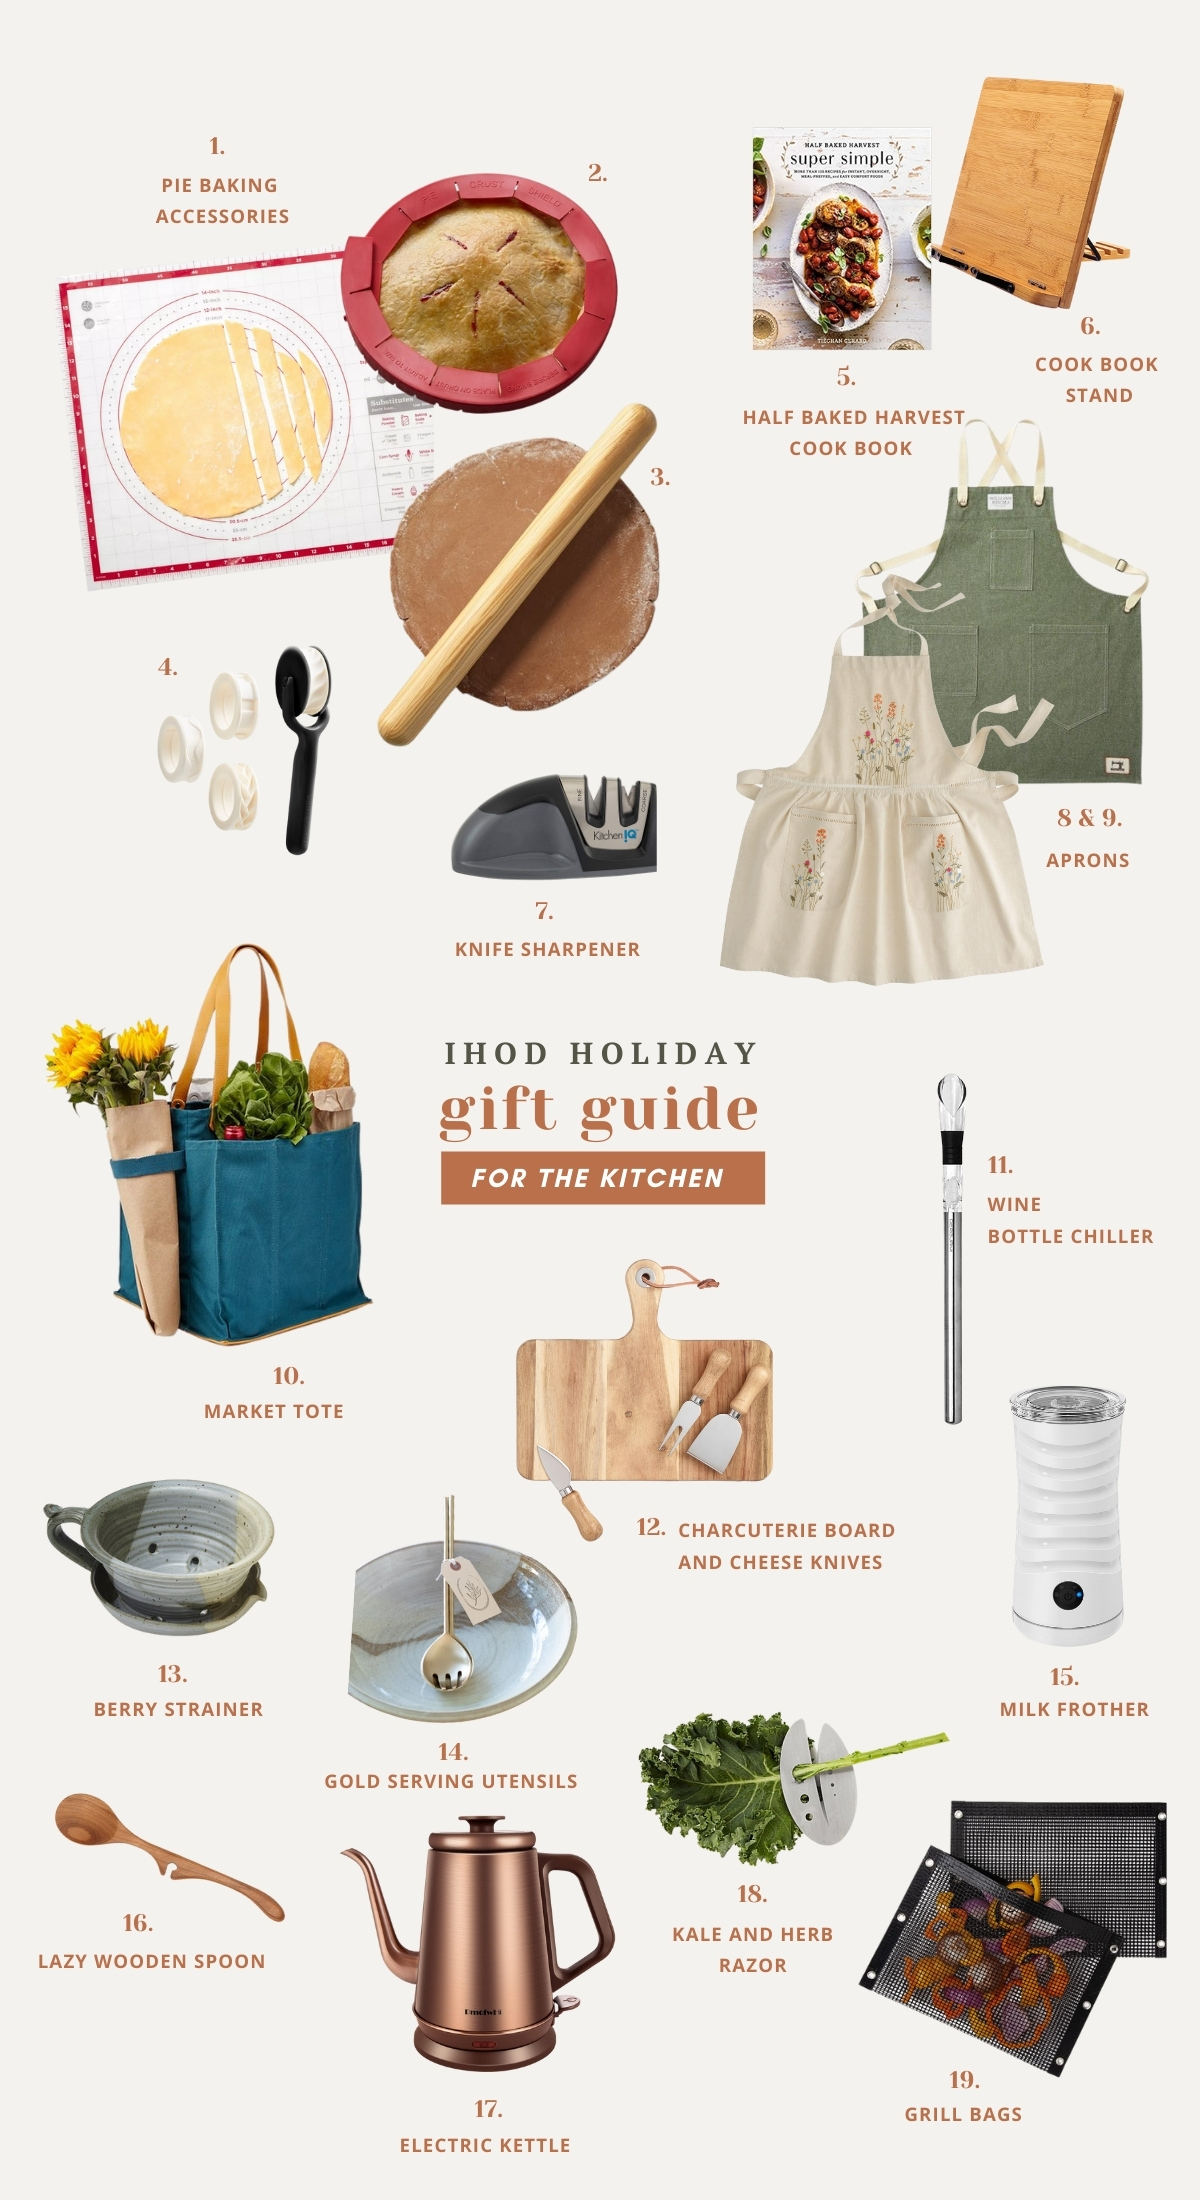 https://inhonorofdesign.com/wp-content/uploads/2021/11/Holiday-Gift-Guide-For-the-kitchen.jpg